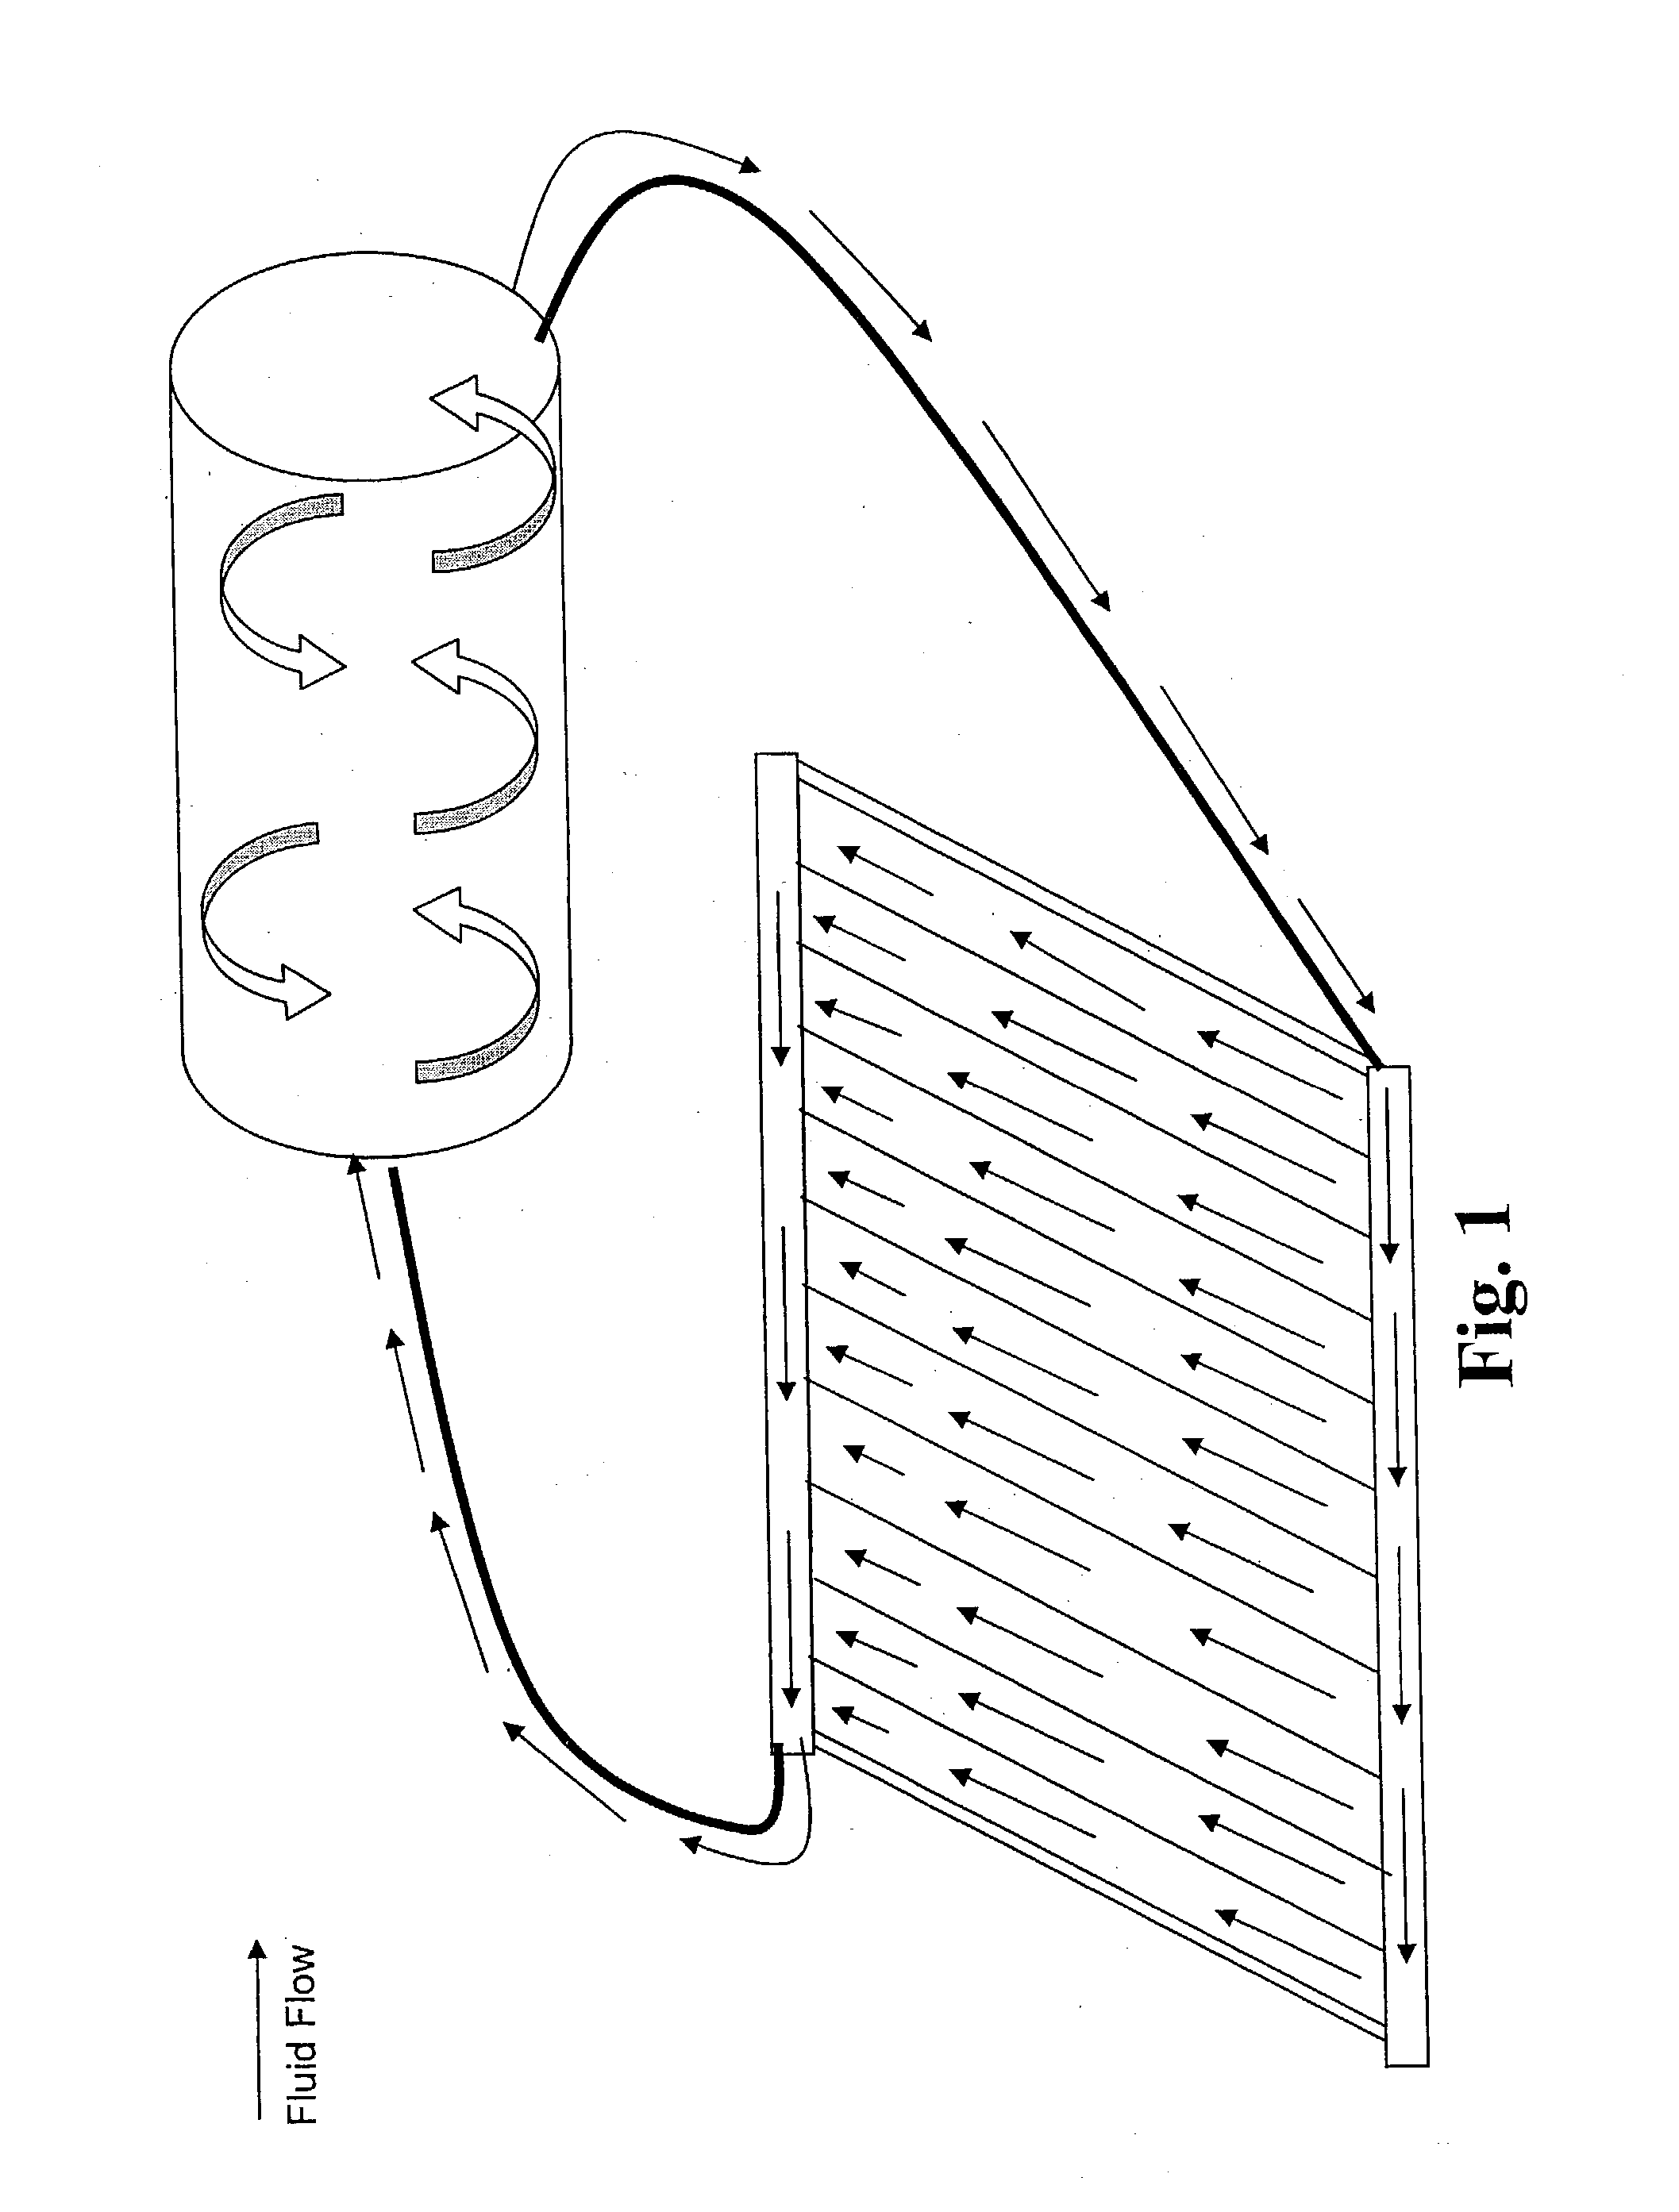 Method of manufacturing a solar collector panel